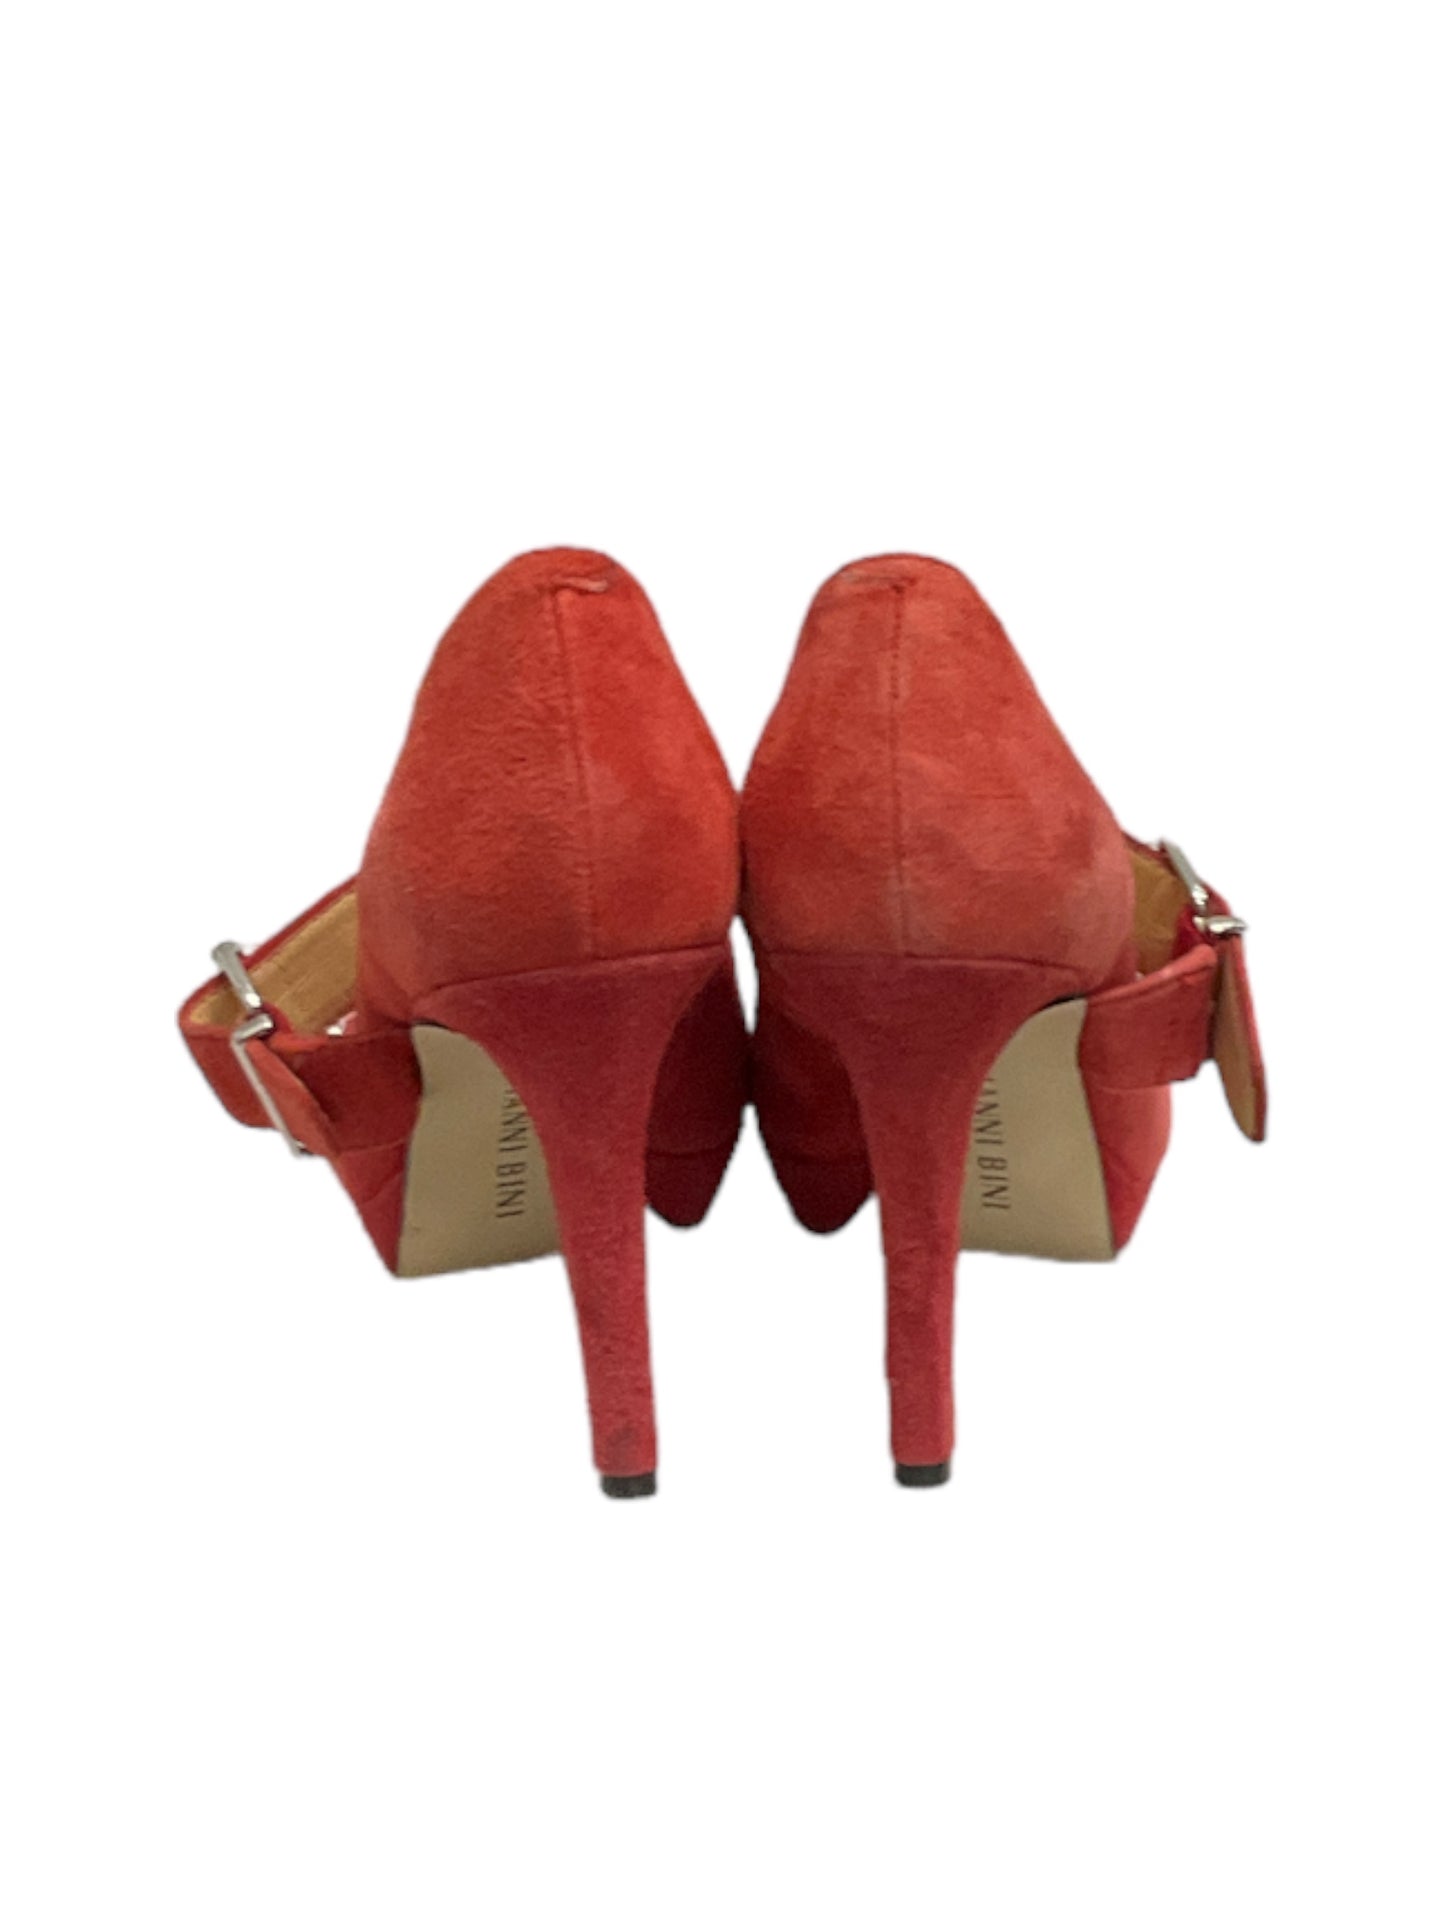 Shoes Heels D Orsay By Gianni Bini  Size: 6.5